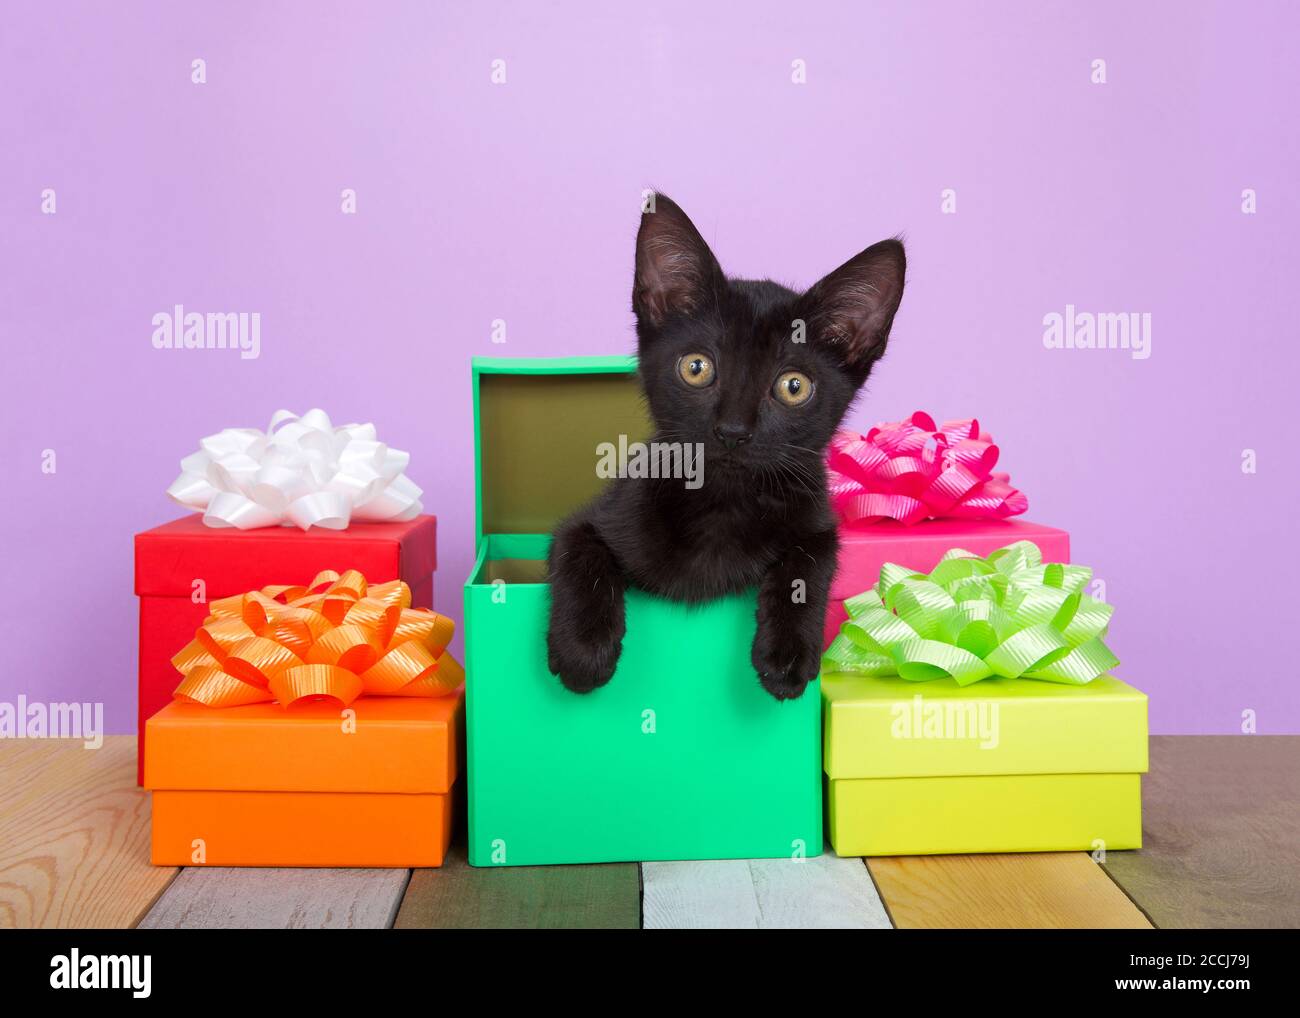 Adorable black kitten peaking out of a colorful birthday present surrounded by boxes with bows on an antique slated wood floor, multi colored and text Stock Photo